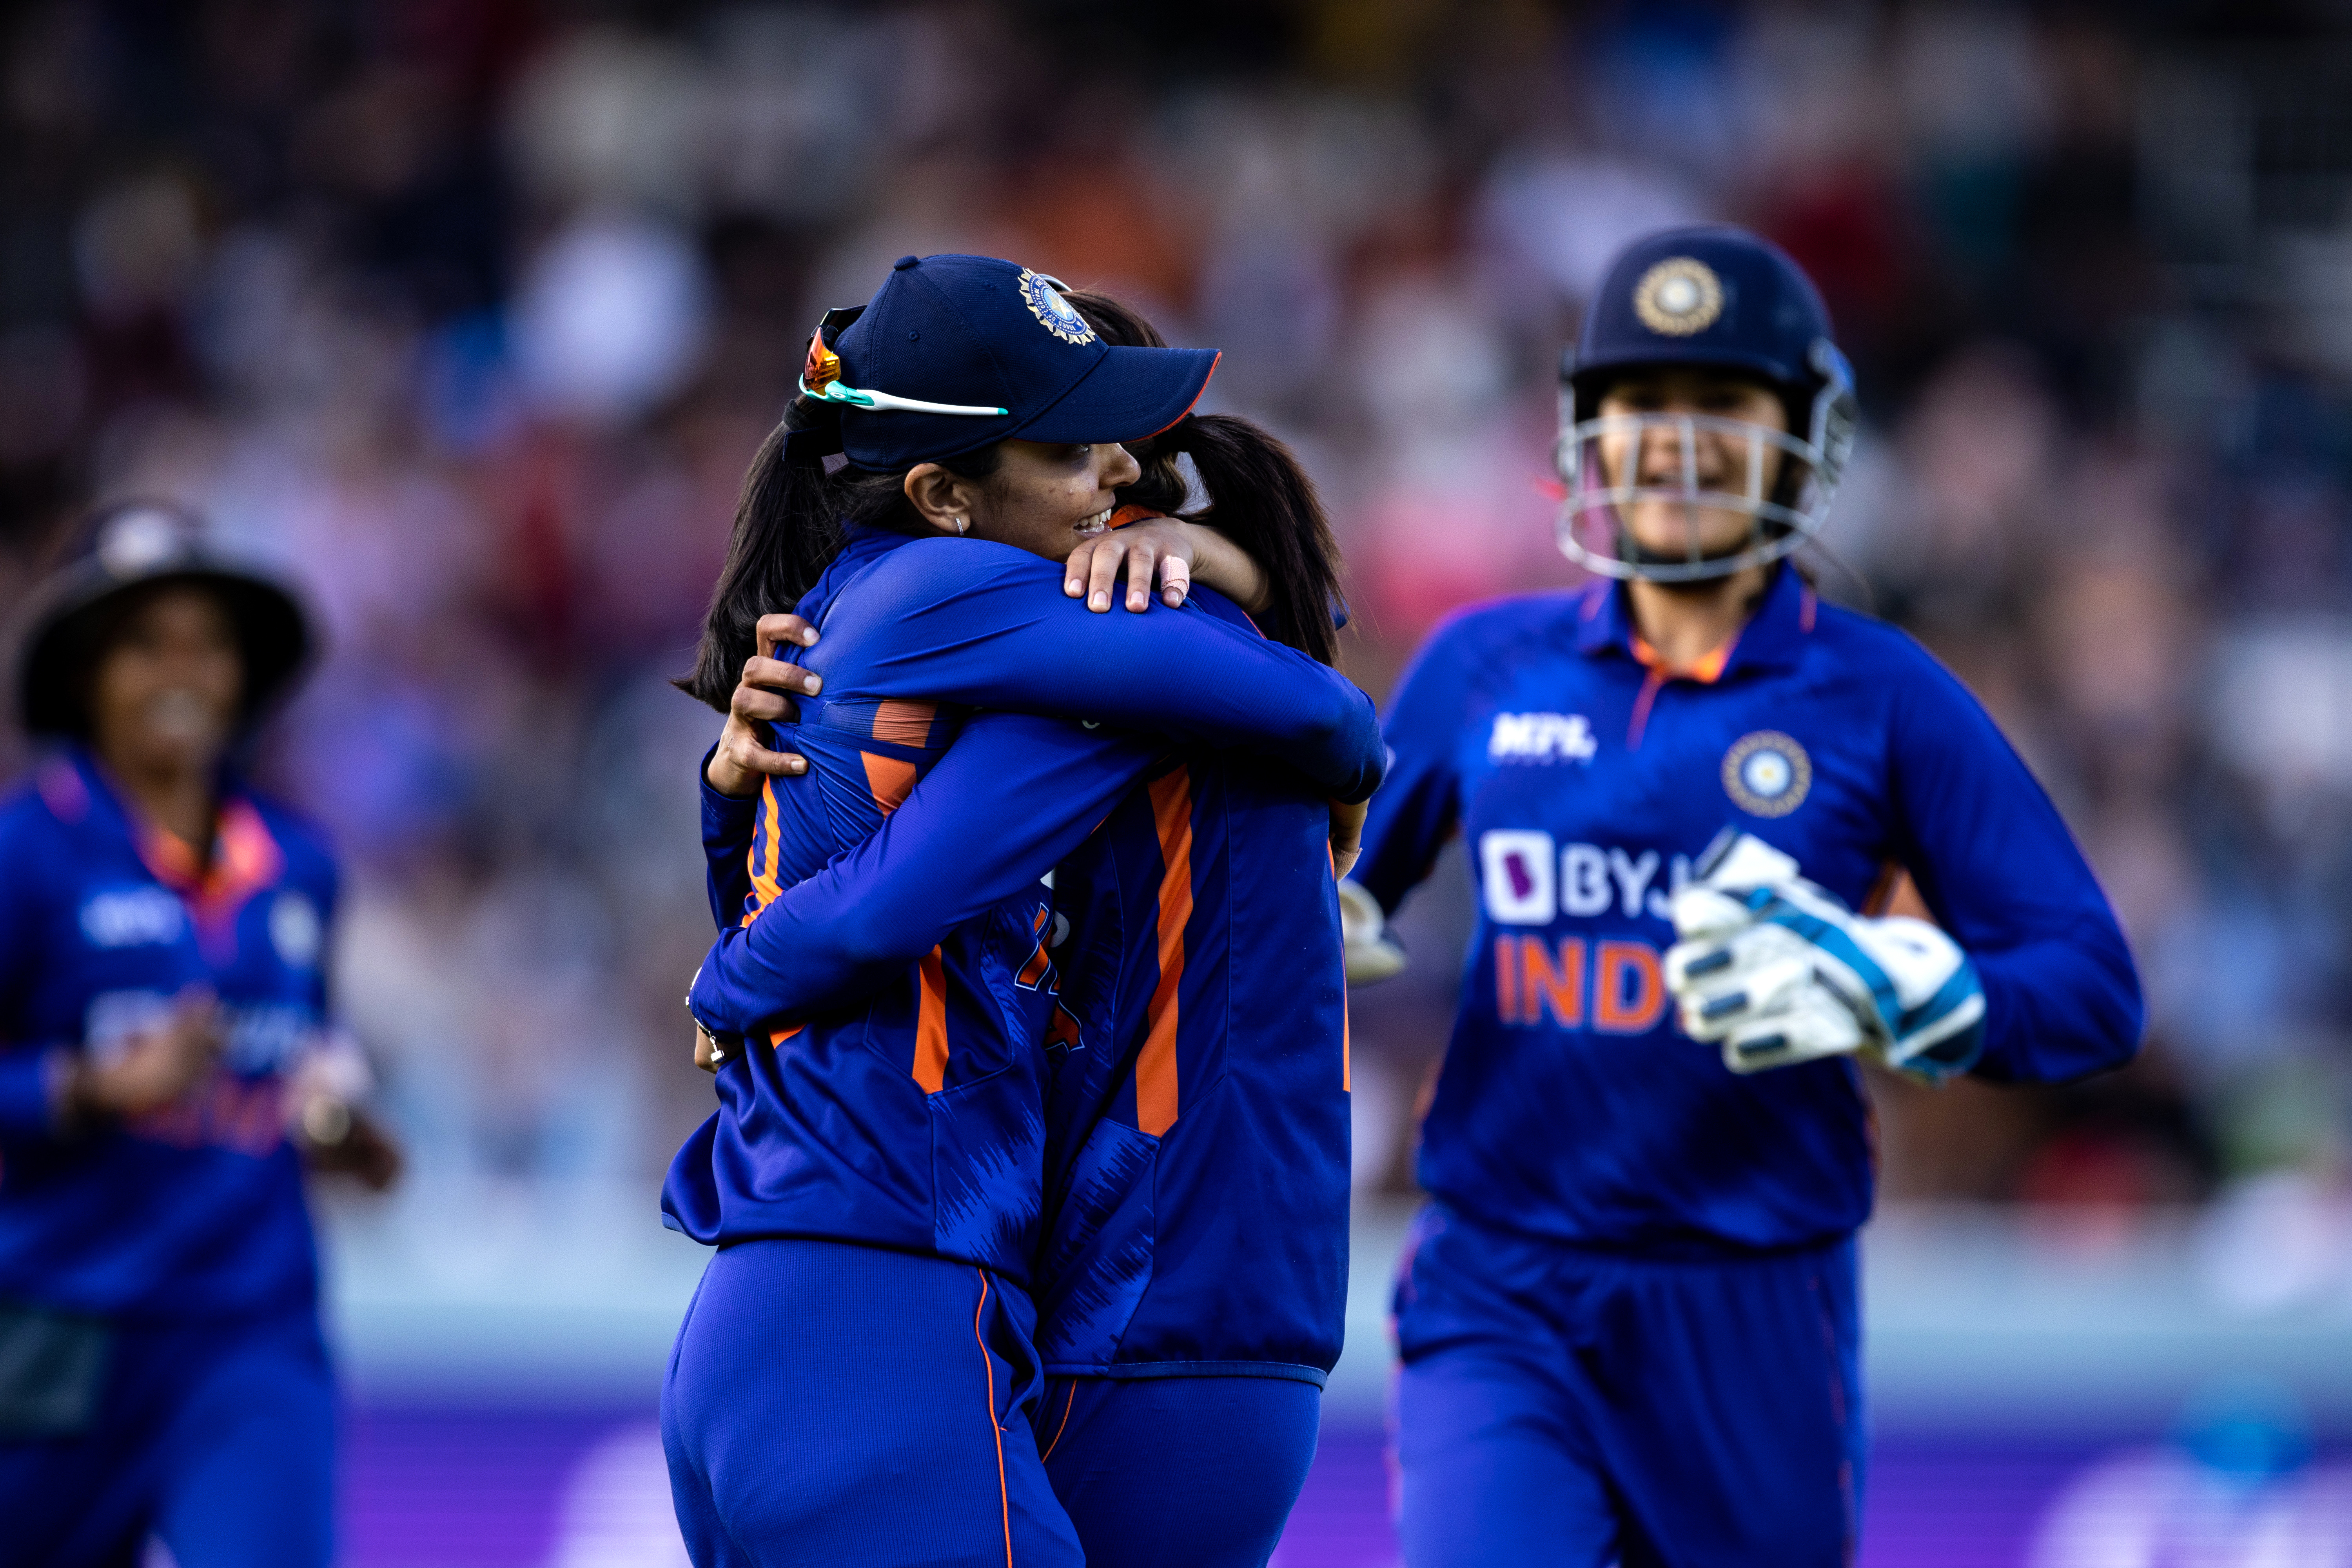  Inaugural Women’s Indian Premier League broadcast rights sold for £95million 